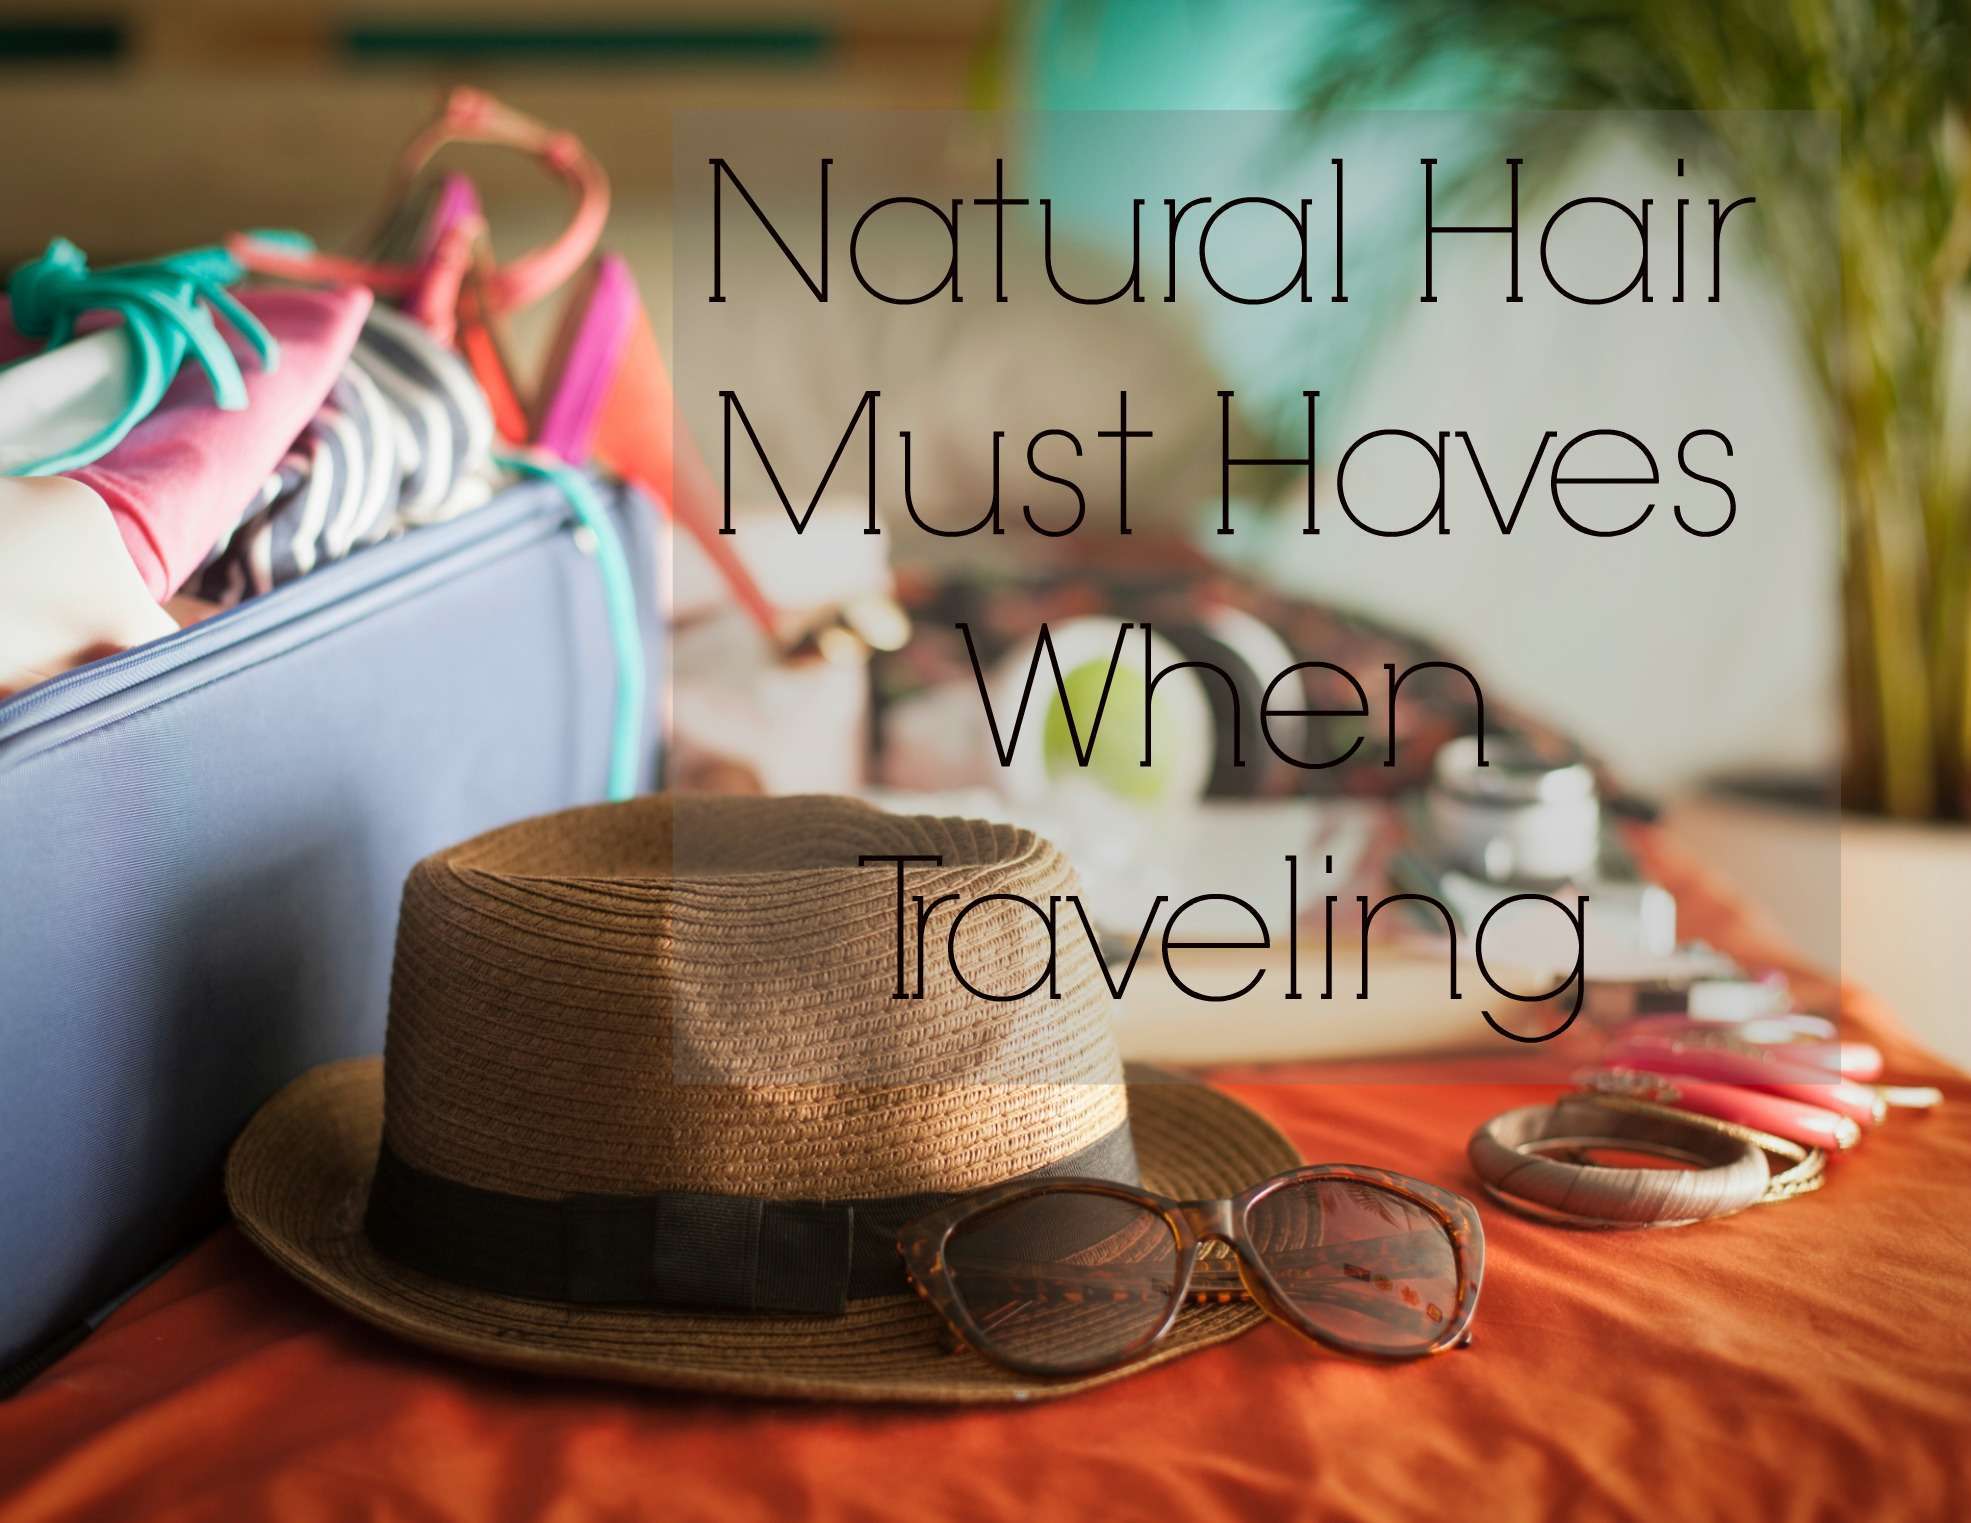 What you need when traveling with natural hair